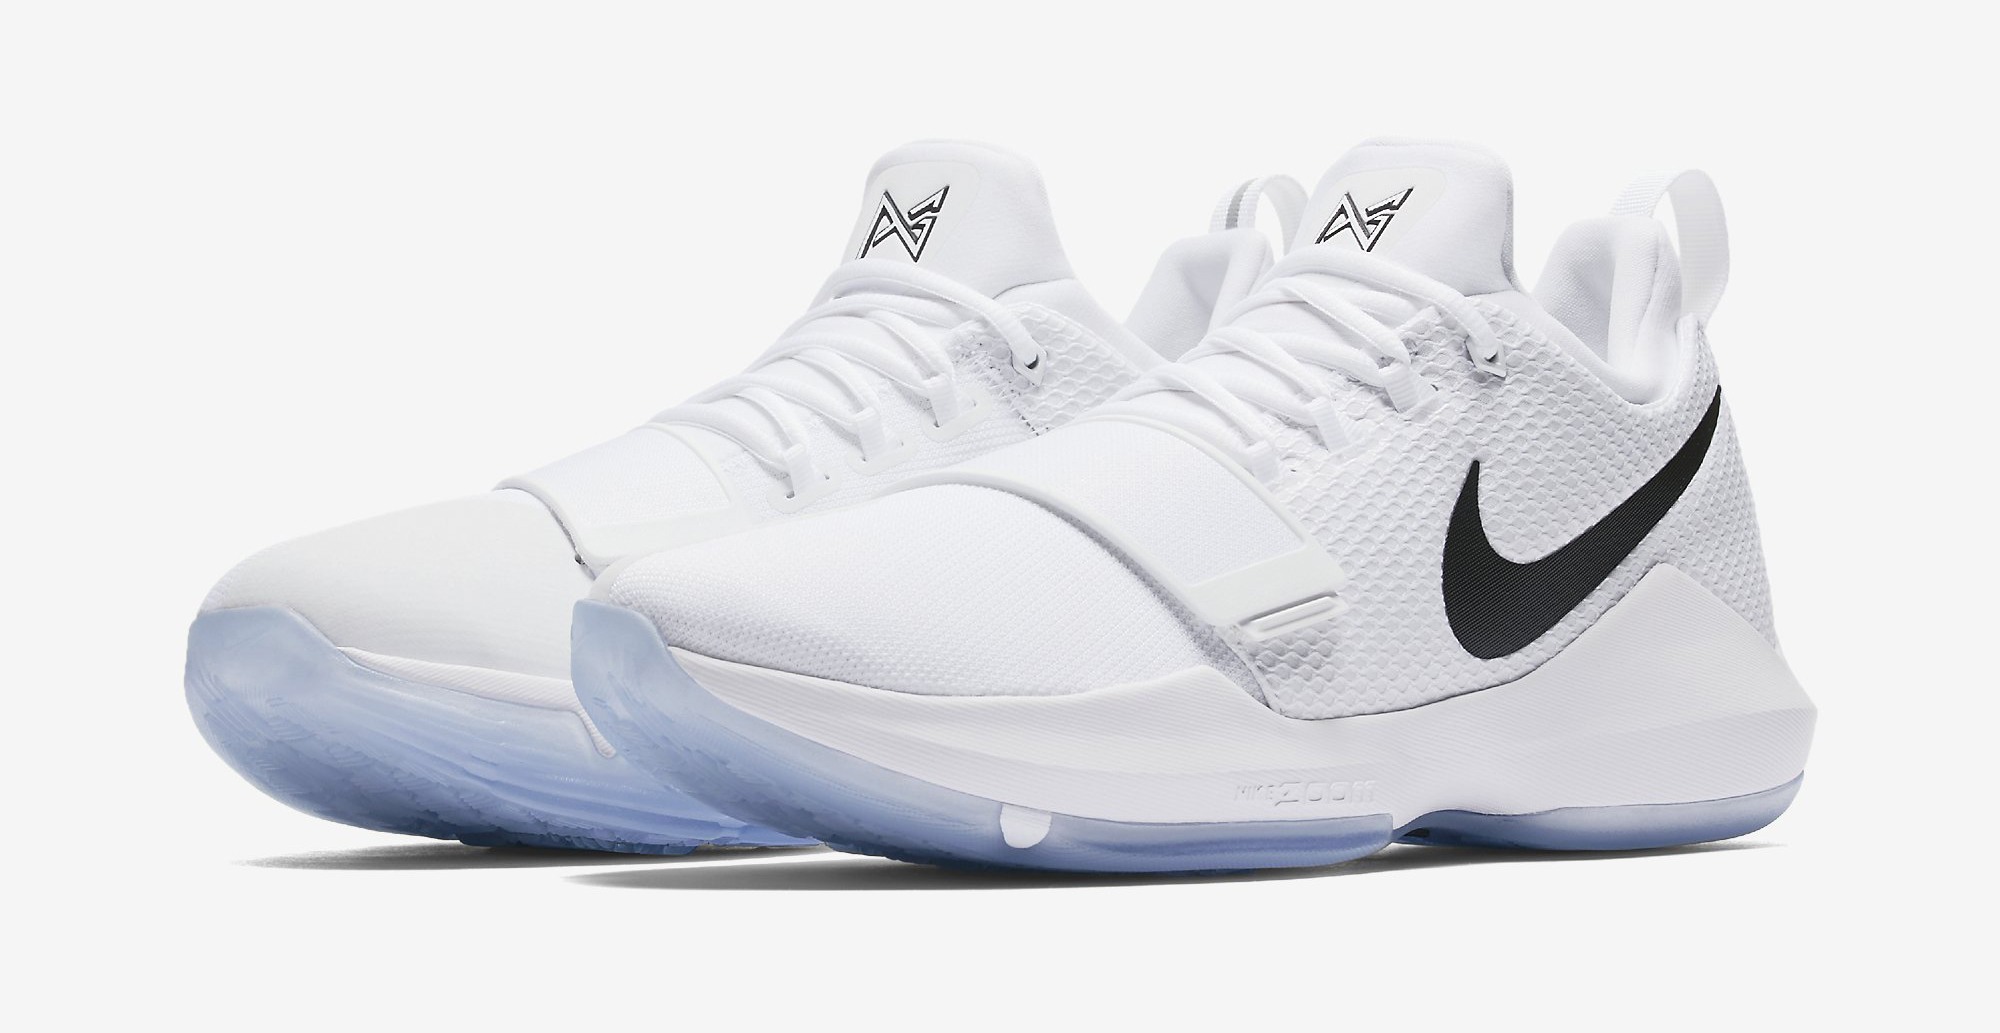 Checkmate Nike PG1 White Black Chrome 878627-100 Release Date Sole